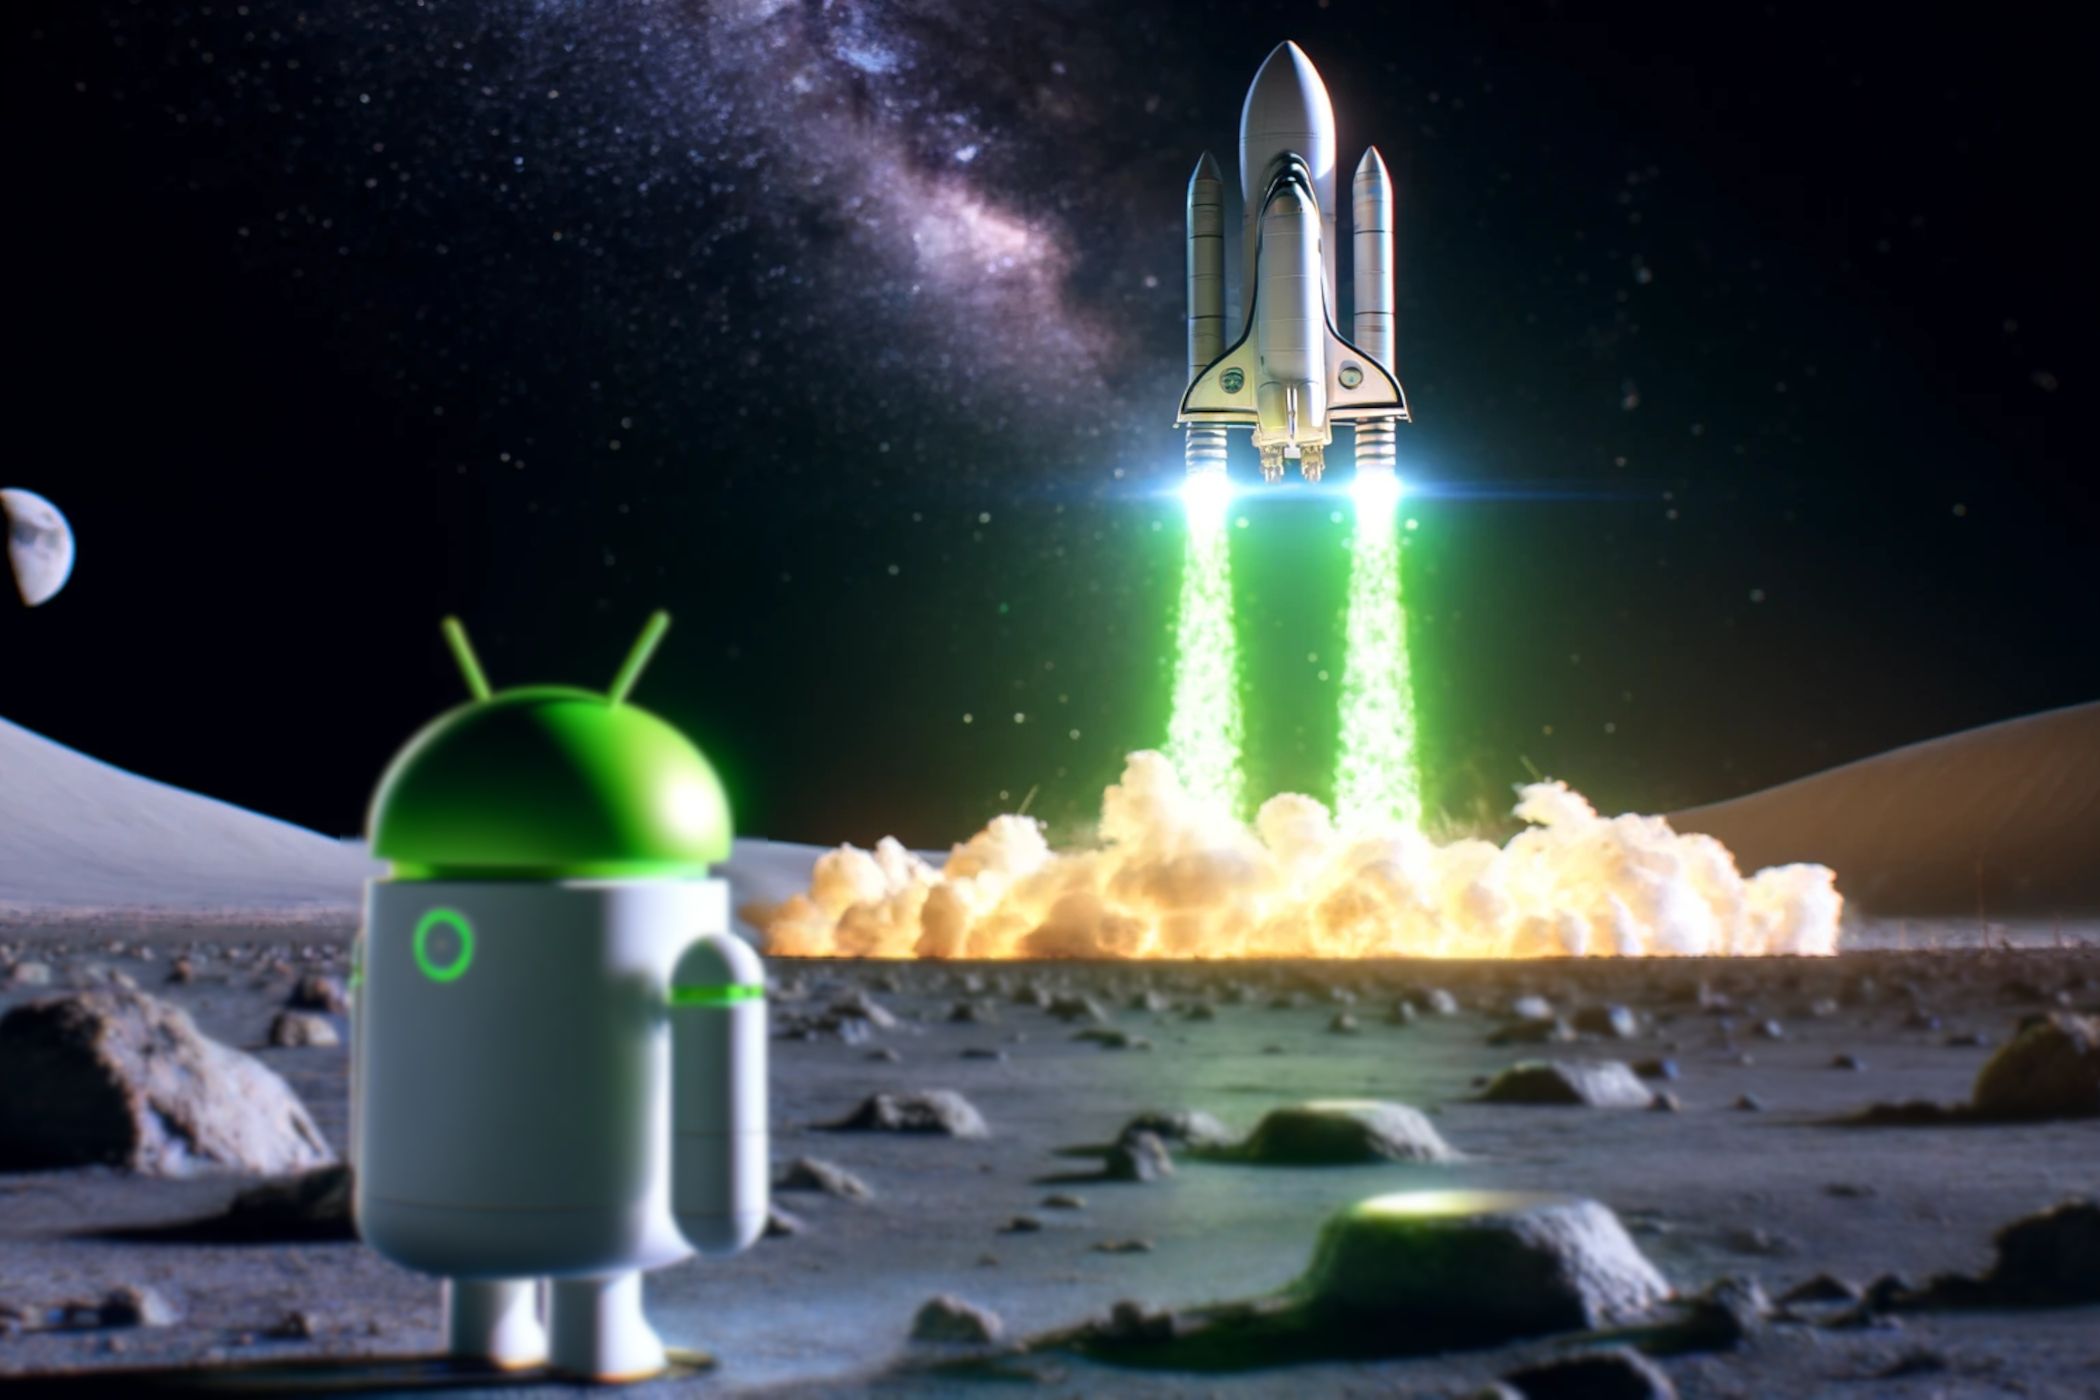 Spaceship blasting off into space as an Android robot watches.